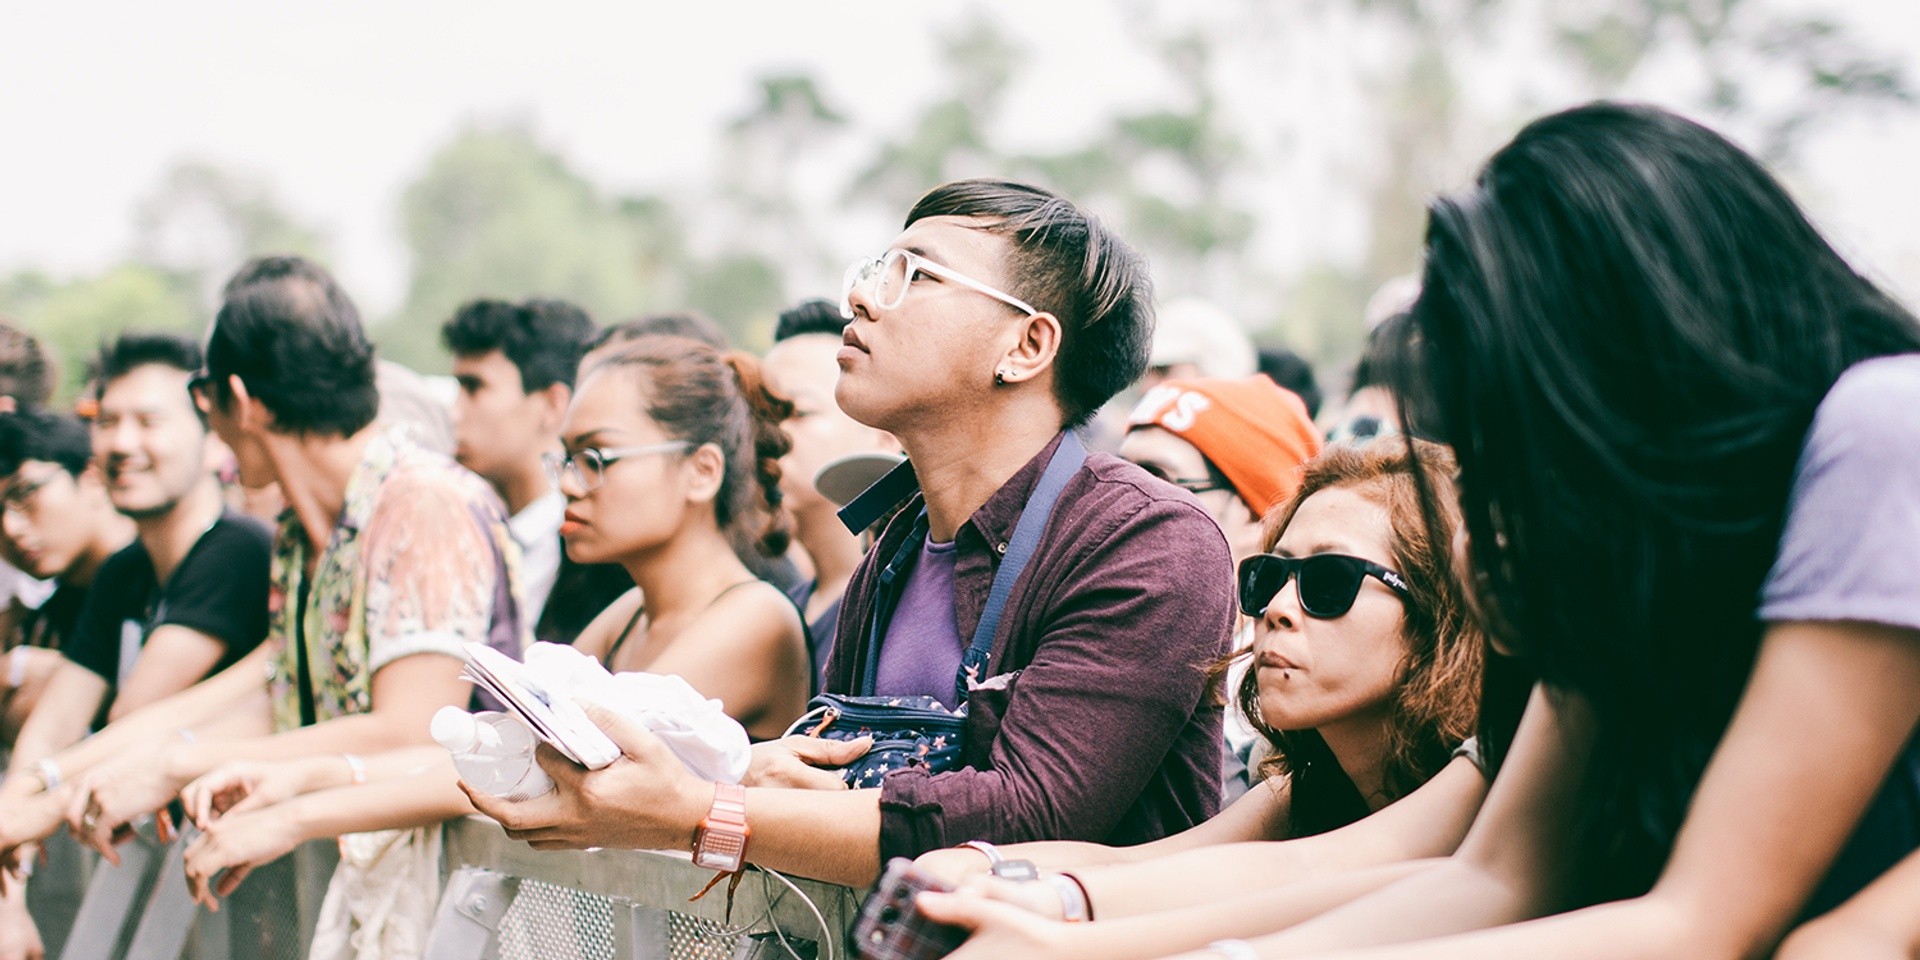 Should festival-goers be mad there's no re-entry at Laneway?